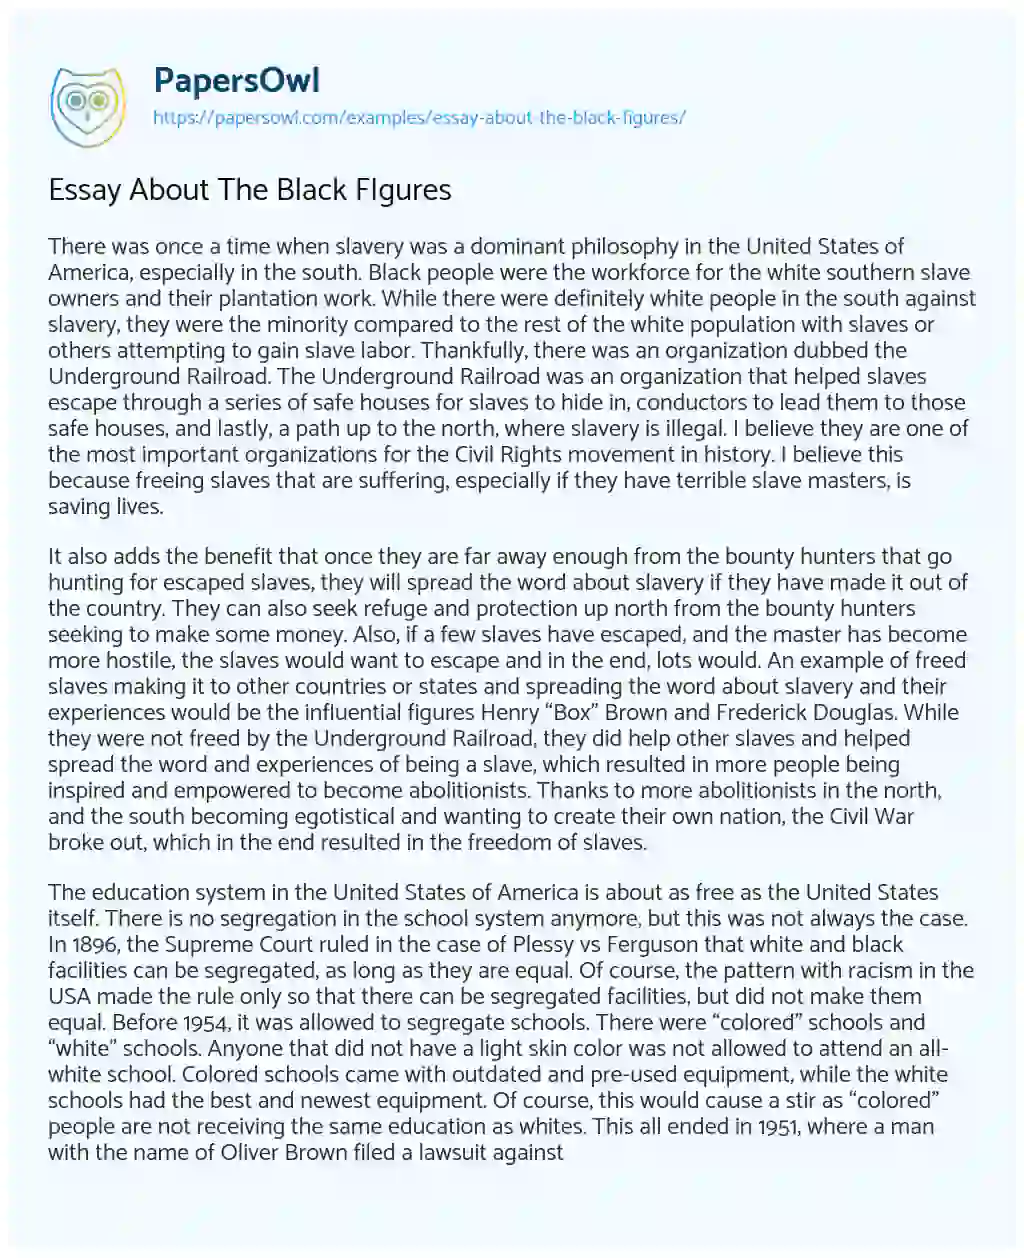 Essay on Essay about the Black FIgures